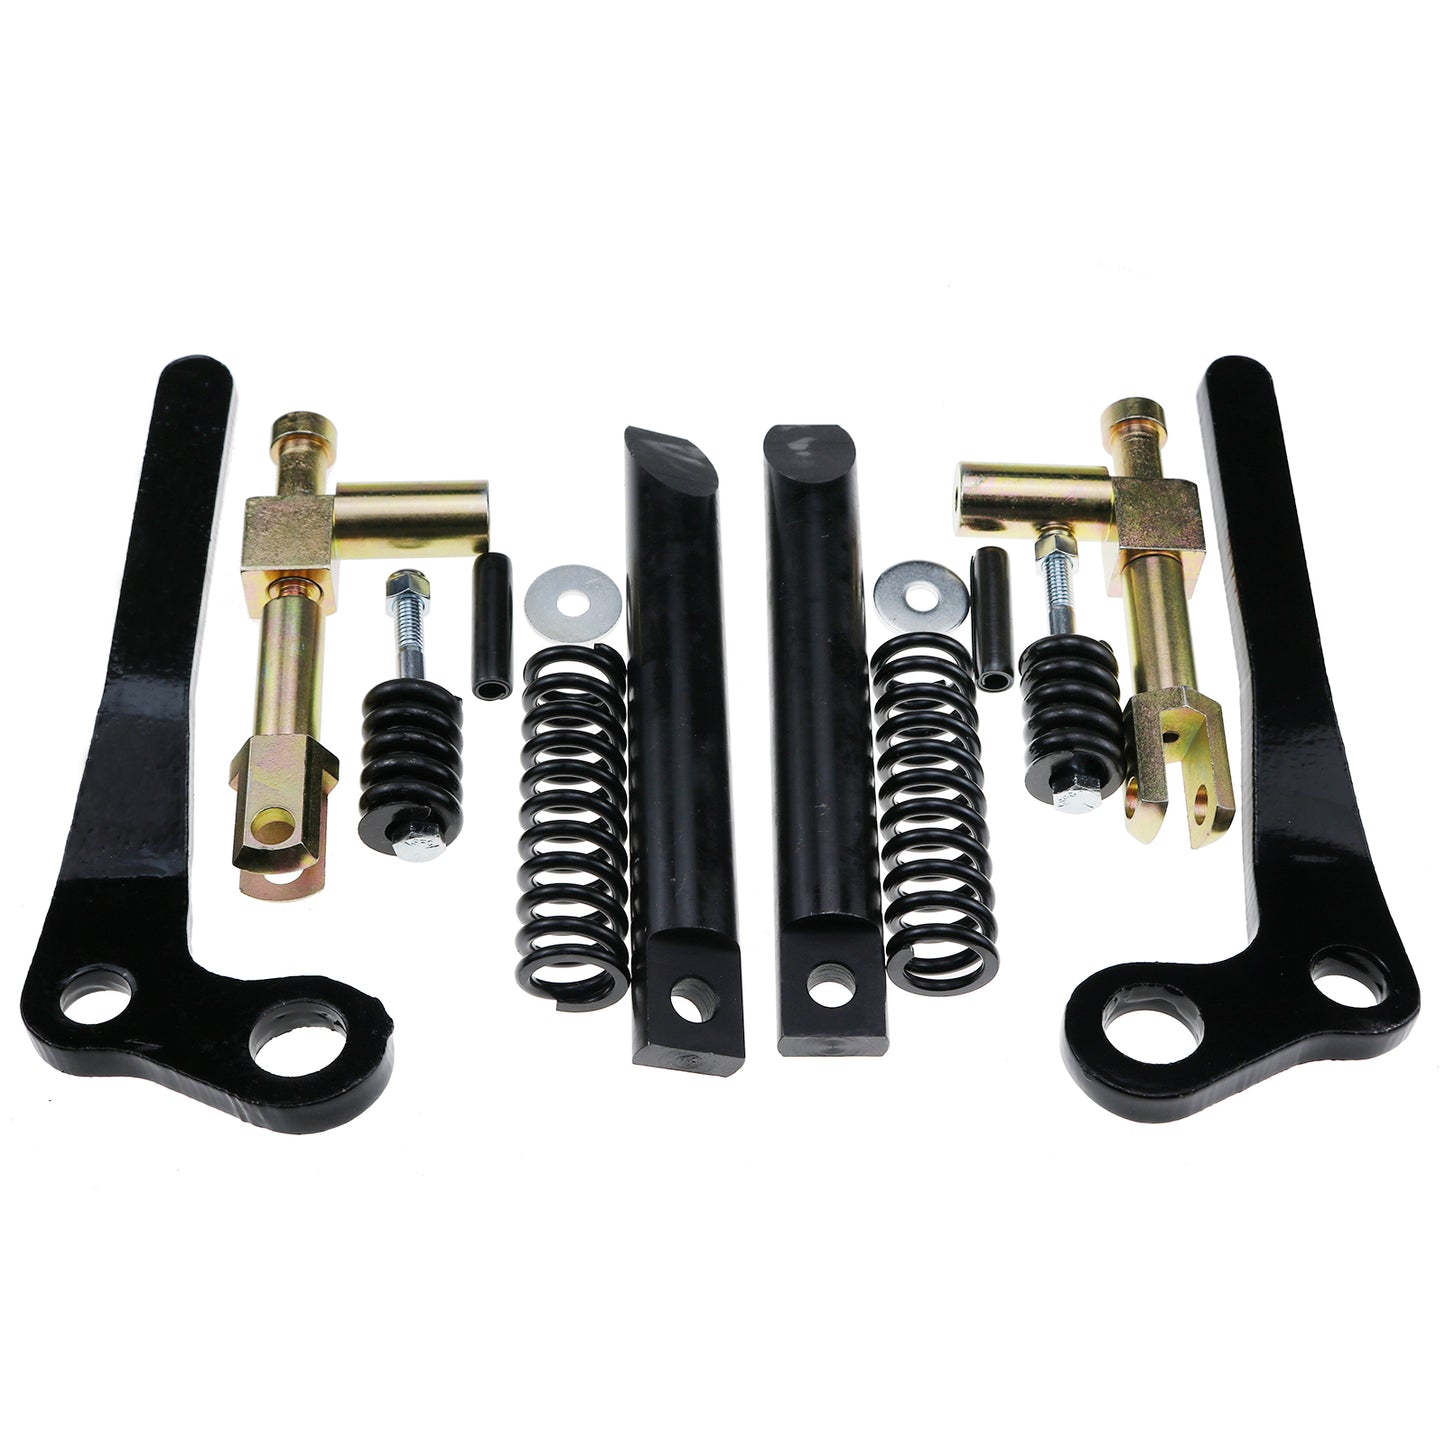 New Bob-Tach LH & RH Lever Kit 6724775 6724776 Compatible with Bobcat Skid Steer 751 753 763 773 7753 863 873 S100 S130 S150 S160 S175 S185 S220 S250 S300 S330 A220 A300 T110 T140 T180 T190 T200 T250